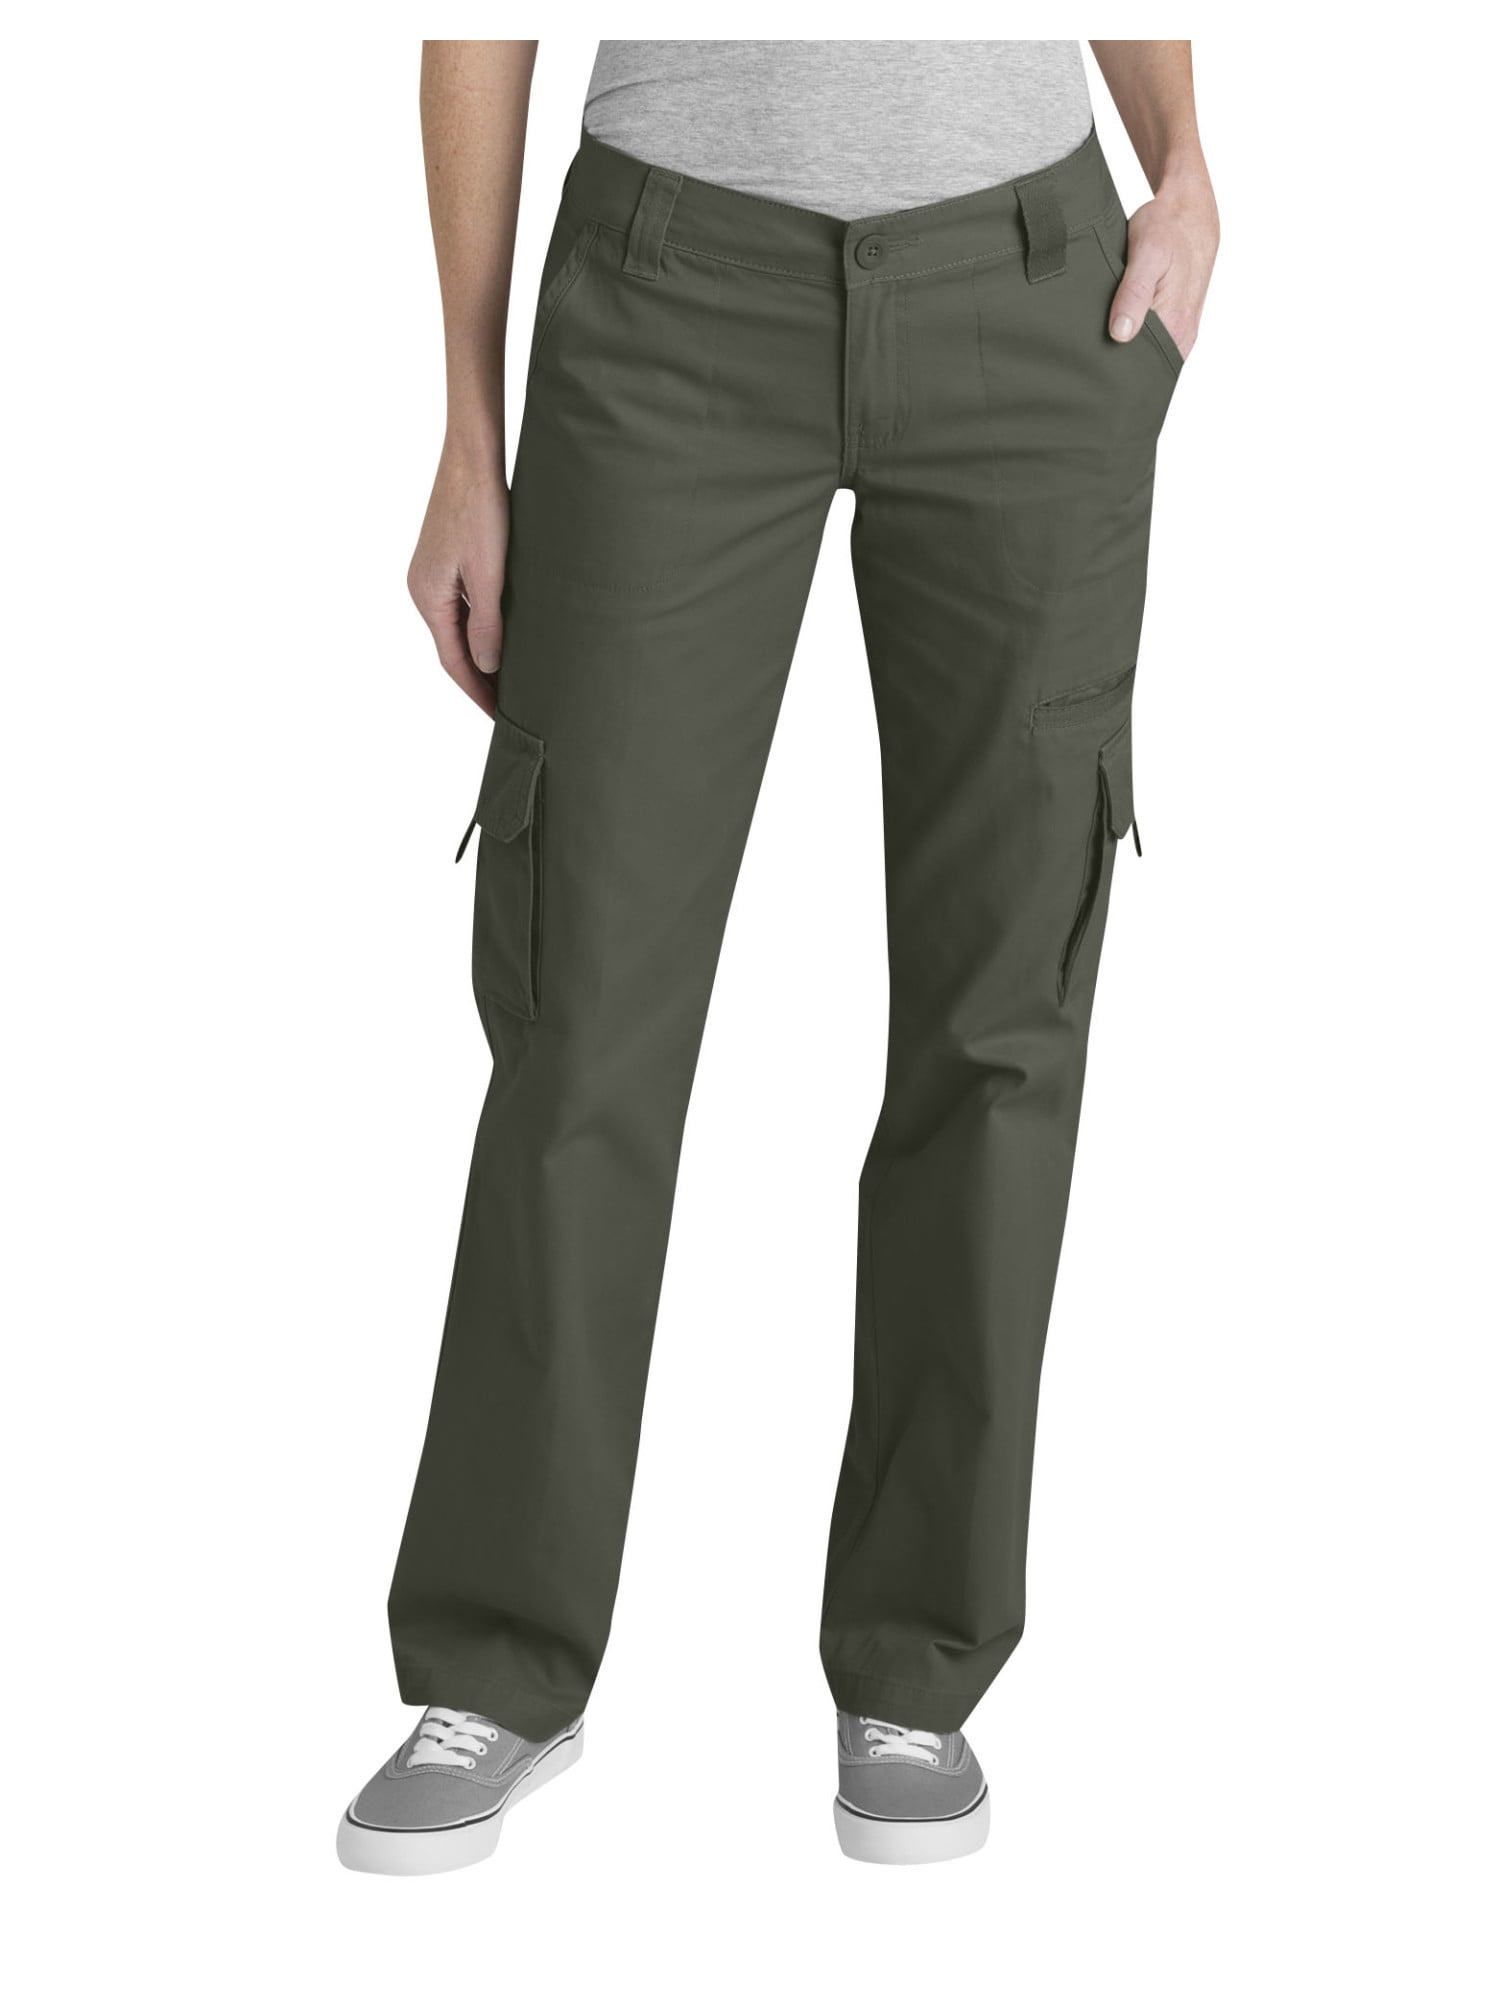 Relaxed Cargo Pant - Walmart.com